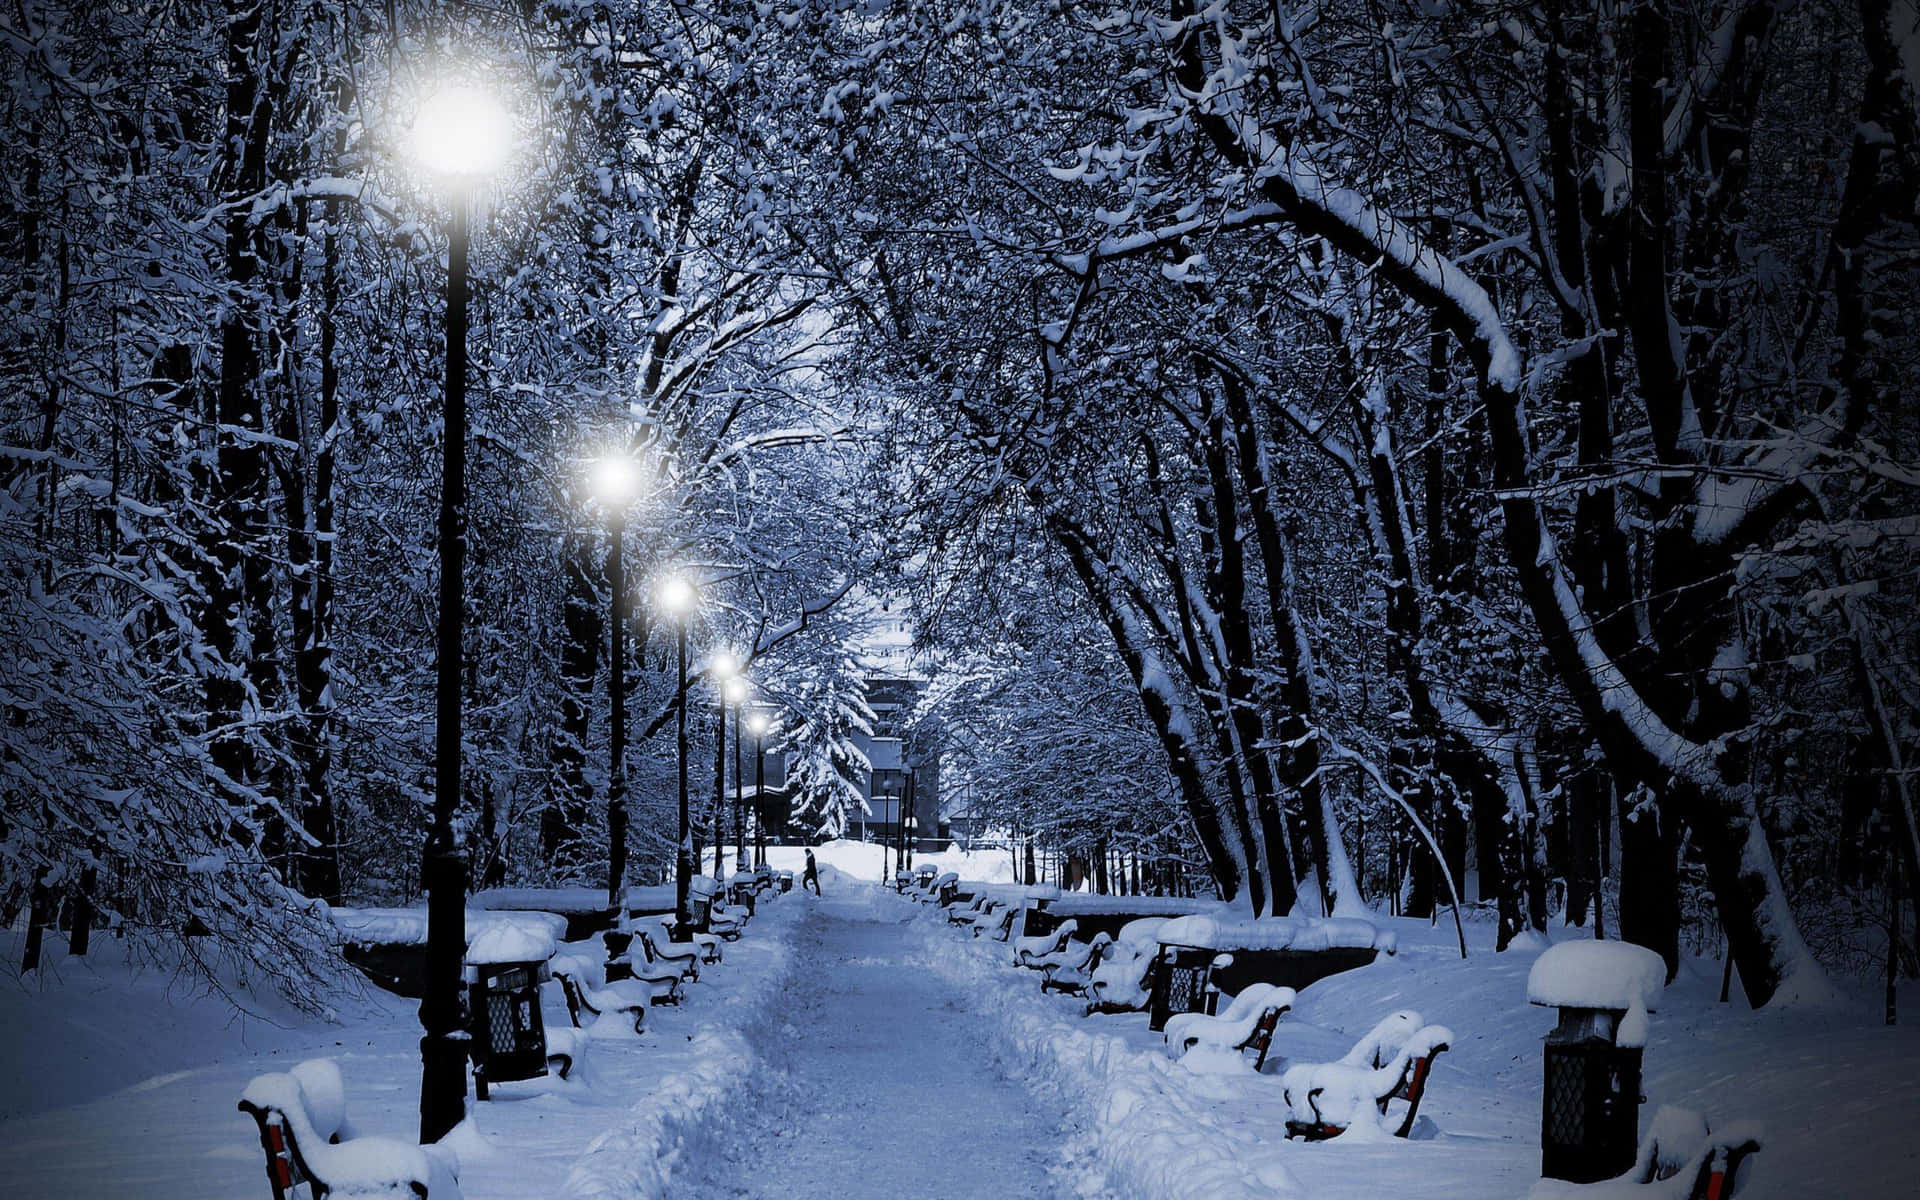 Enjoy the peace and beauty of a winter landscape adorned with Christmas Snow. Wallpaper